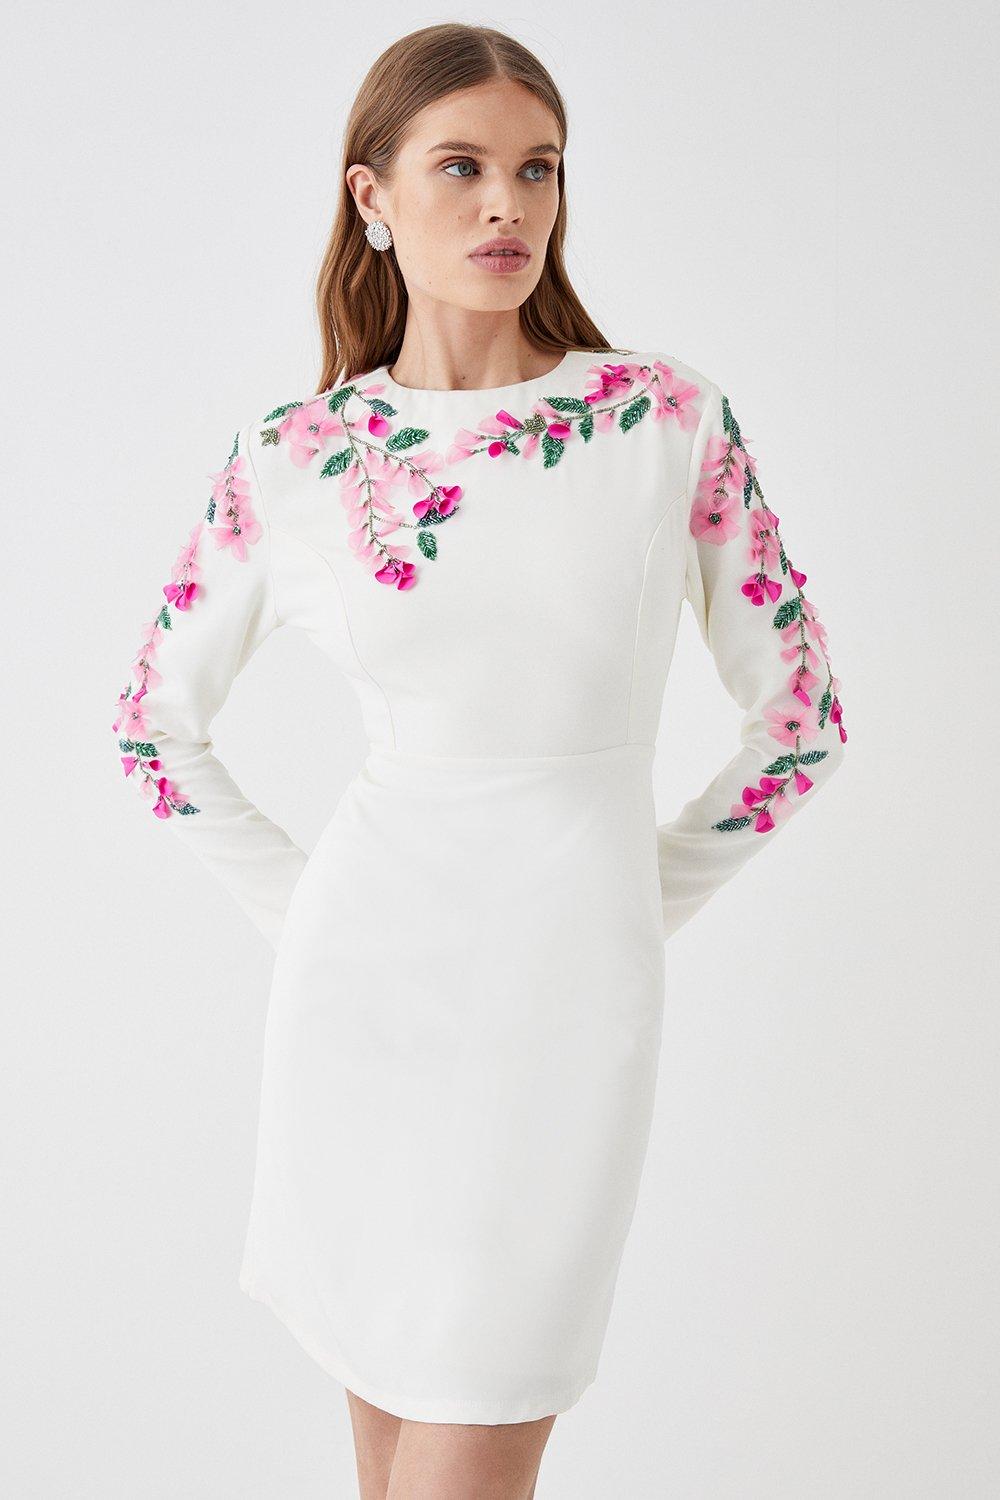 Hand Stitched 3d Floral Long Sleeve Mini Dress - White